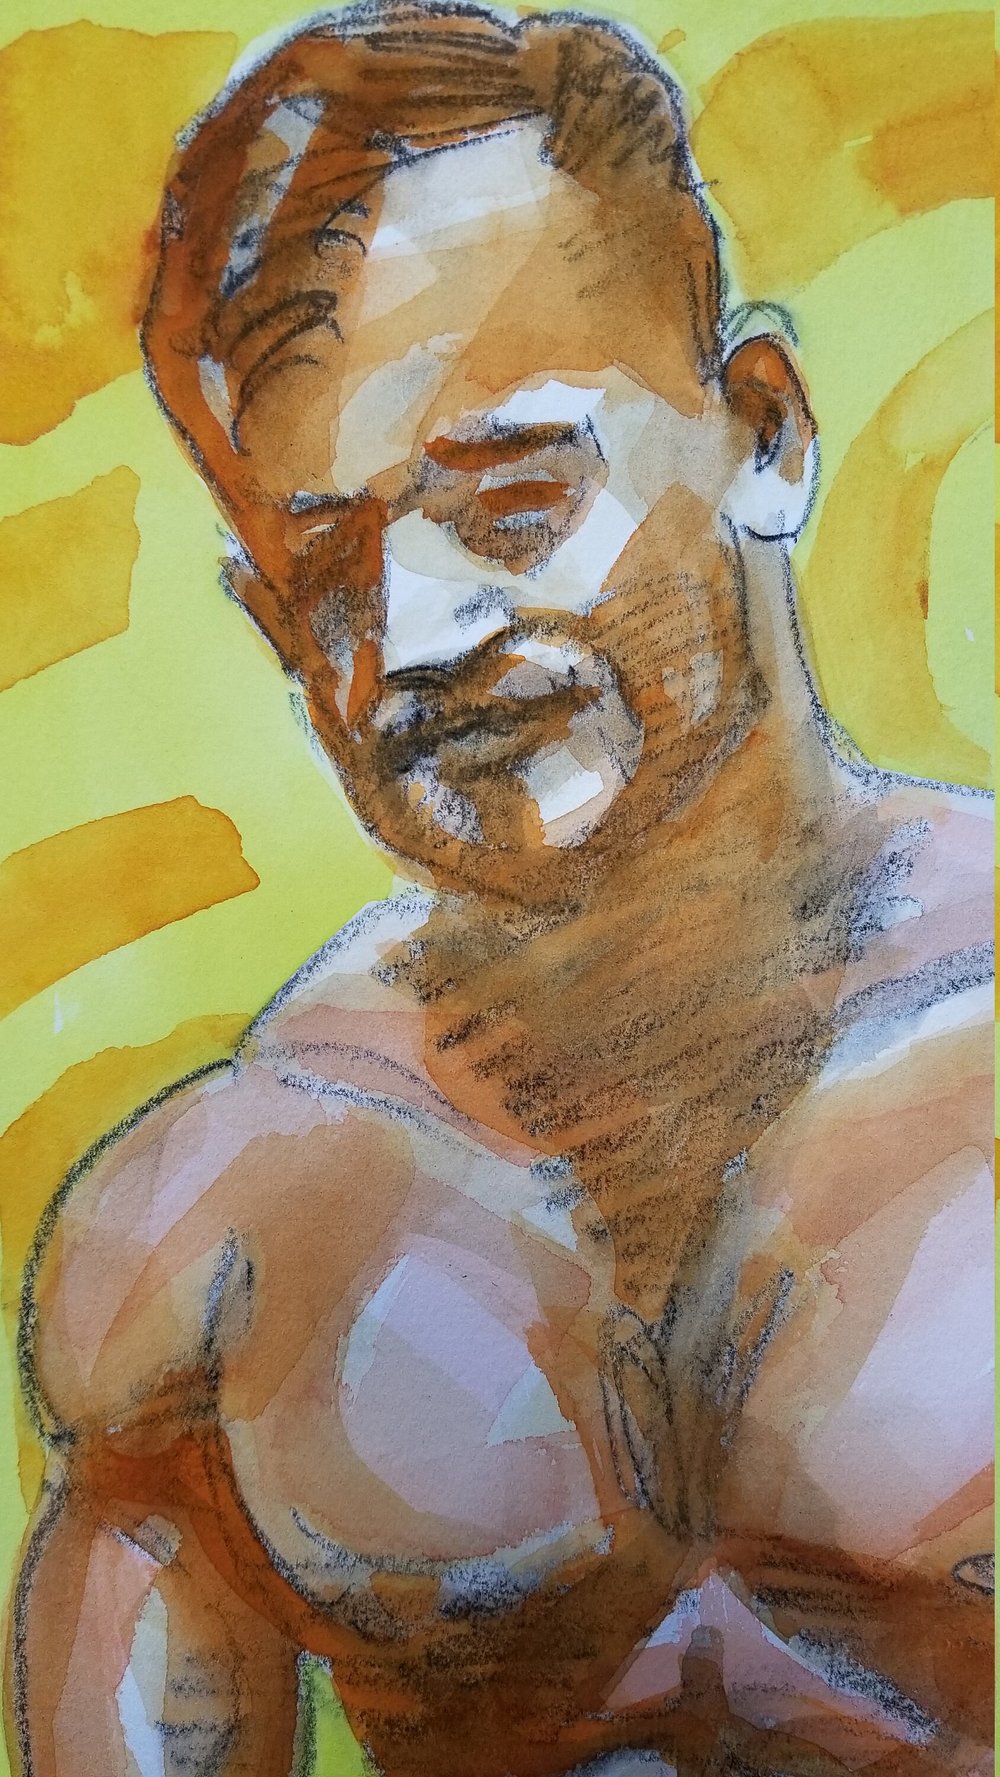 Italian, 11x14 inches watercolor on paper by Kenney Mencher — Kenney  Mencher Artist: Representing the Underrepresented